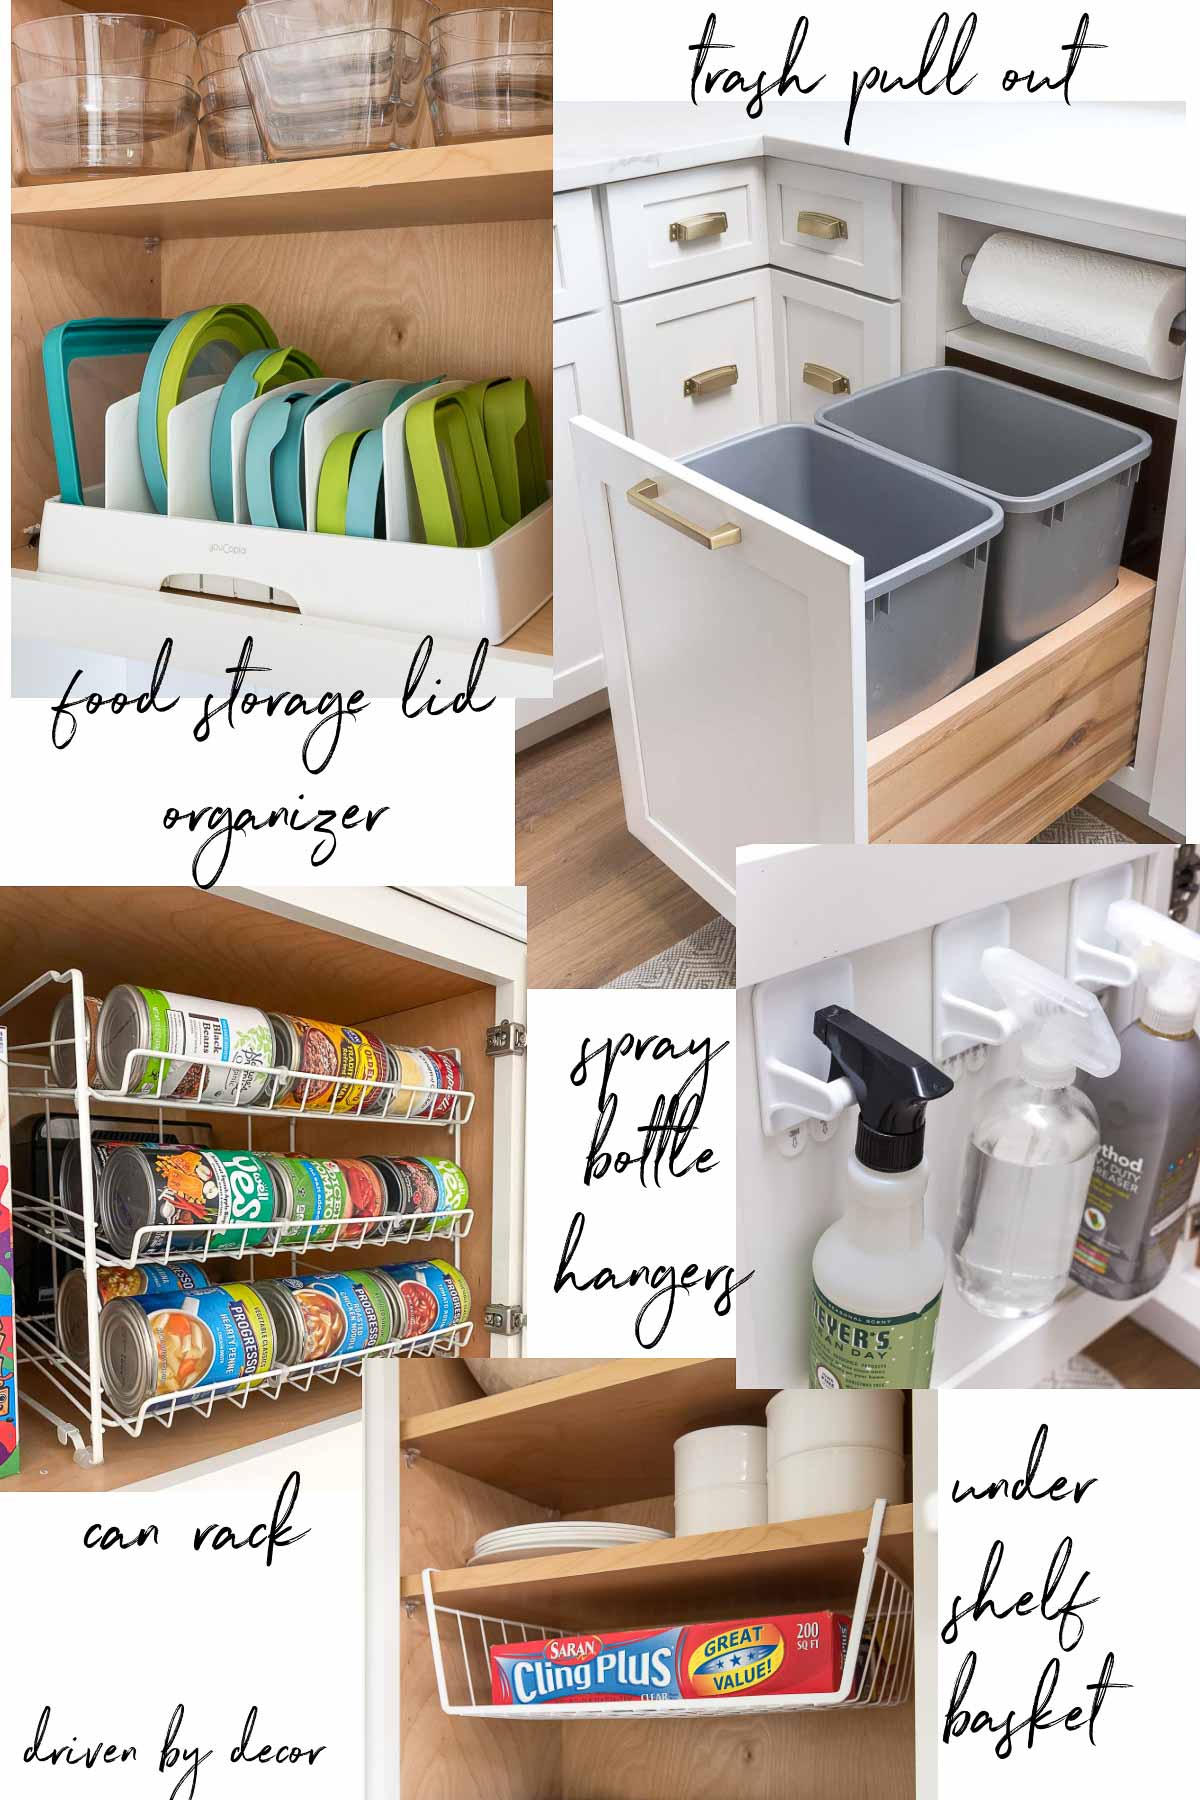 Wire Baskets Are Great Ways to Keep Your Bathroom and Kitchen Sink Cabinets  Organized